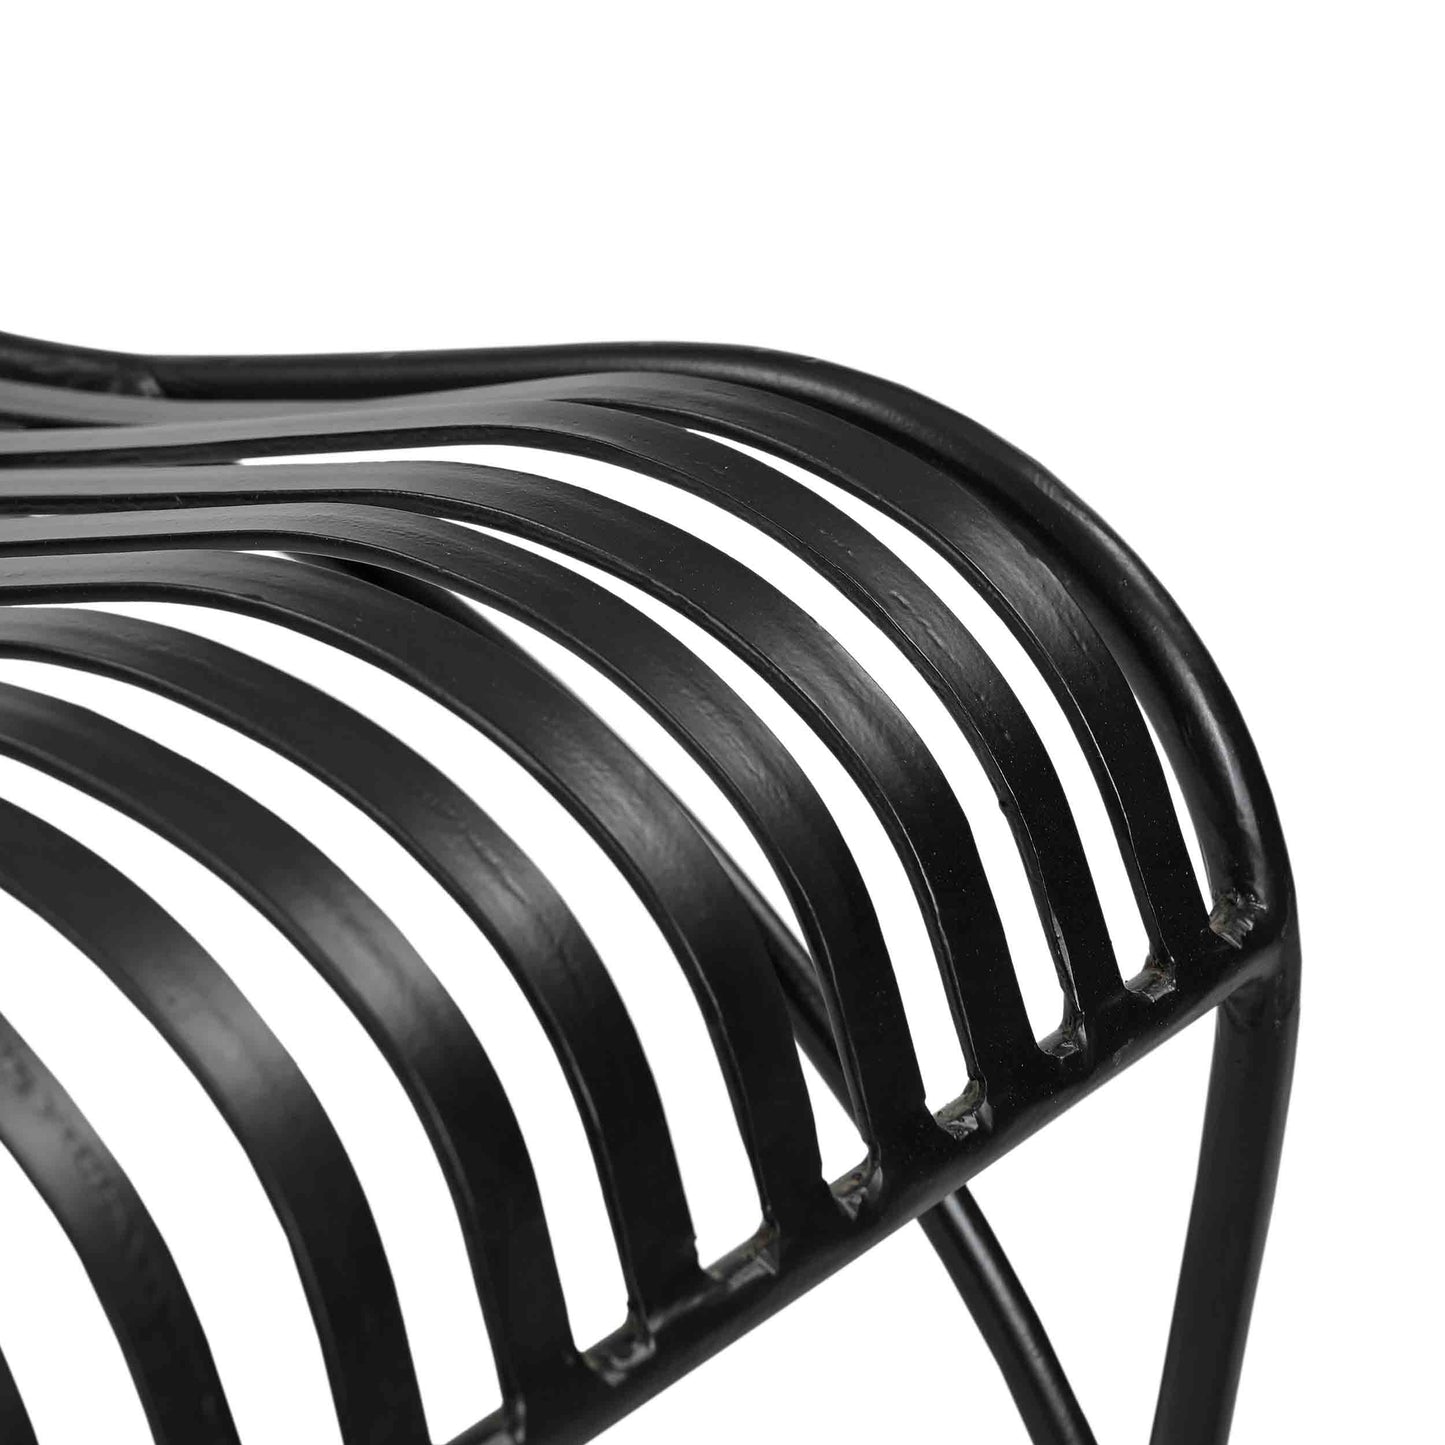 The Tyra Recycled Metal Chair in Black